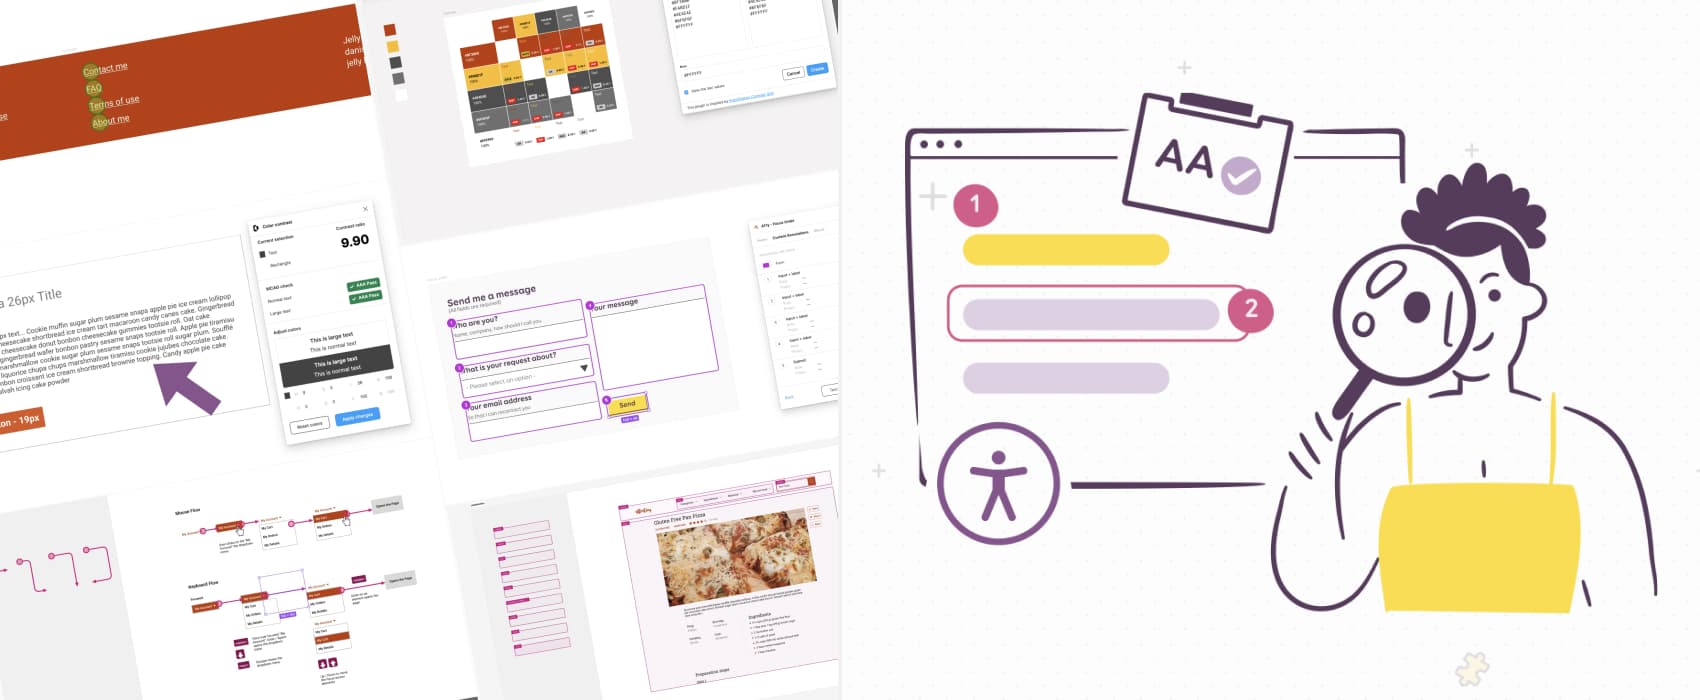 How to check and document design accessibility in your mockups